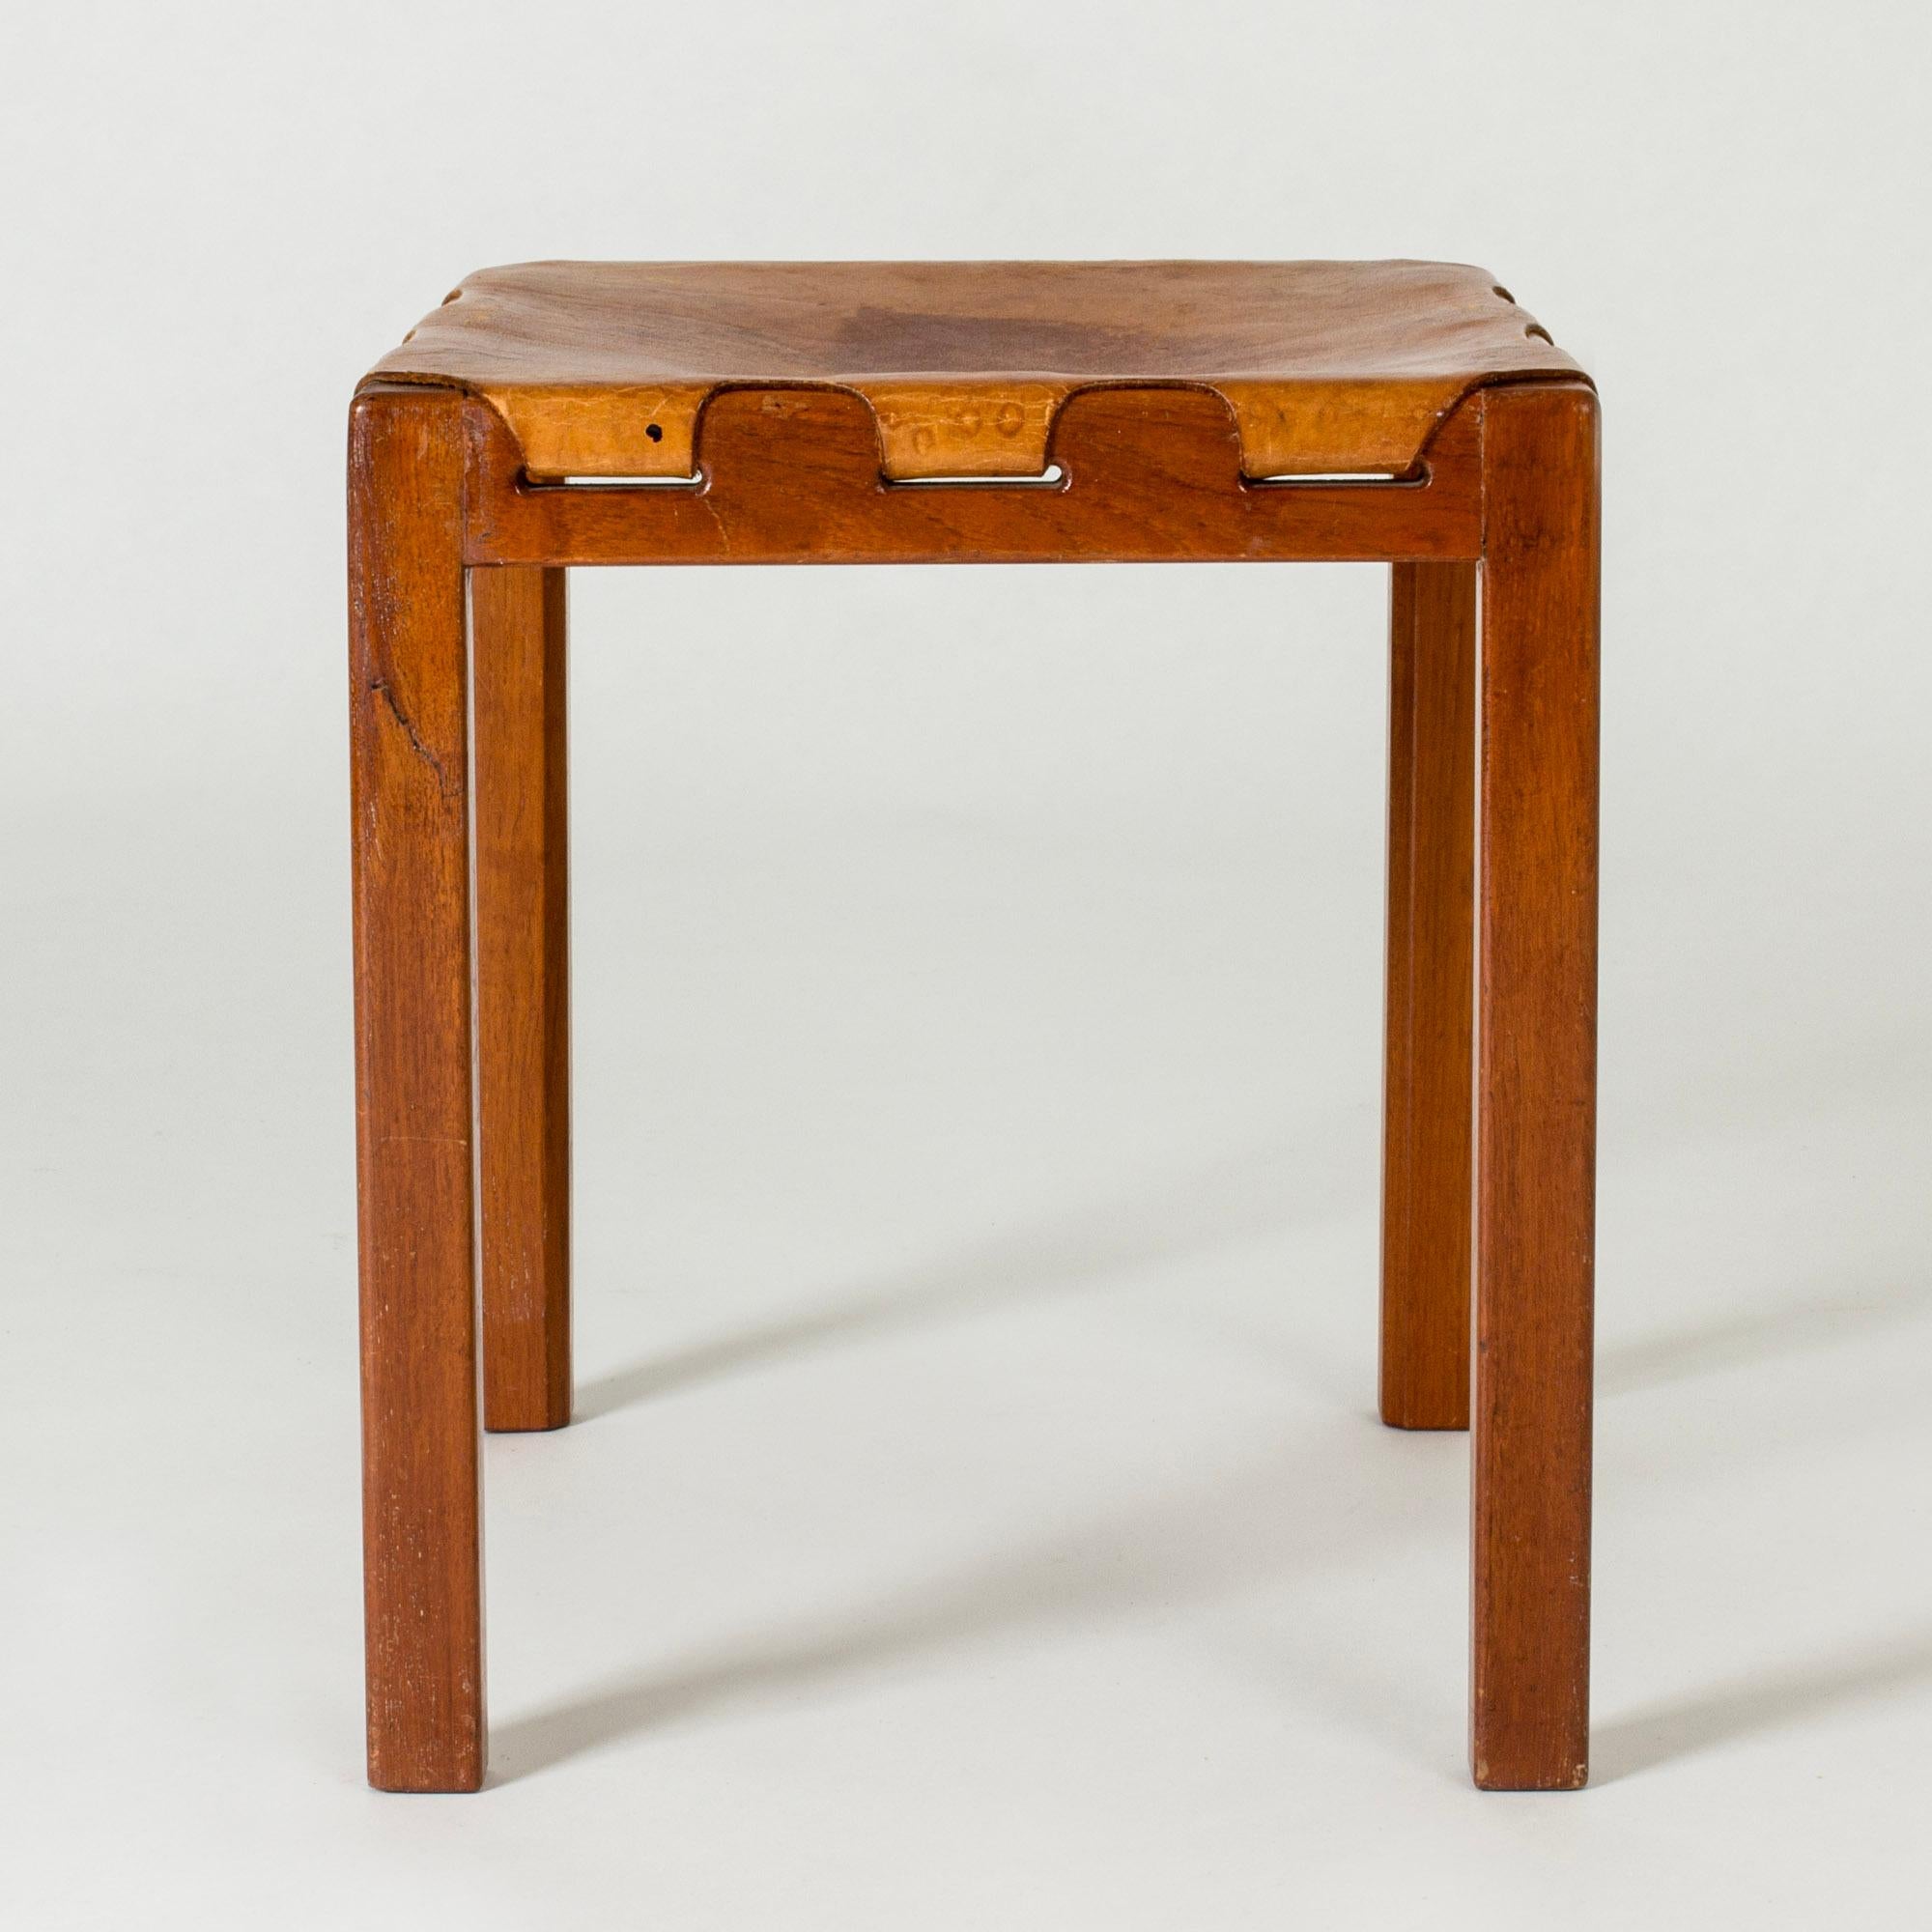 Swedish Midcentury Modern Stool, mahogany and leather, Sweden, 1950s For Sale